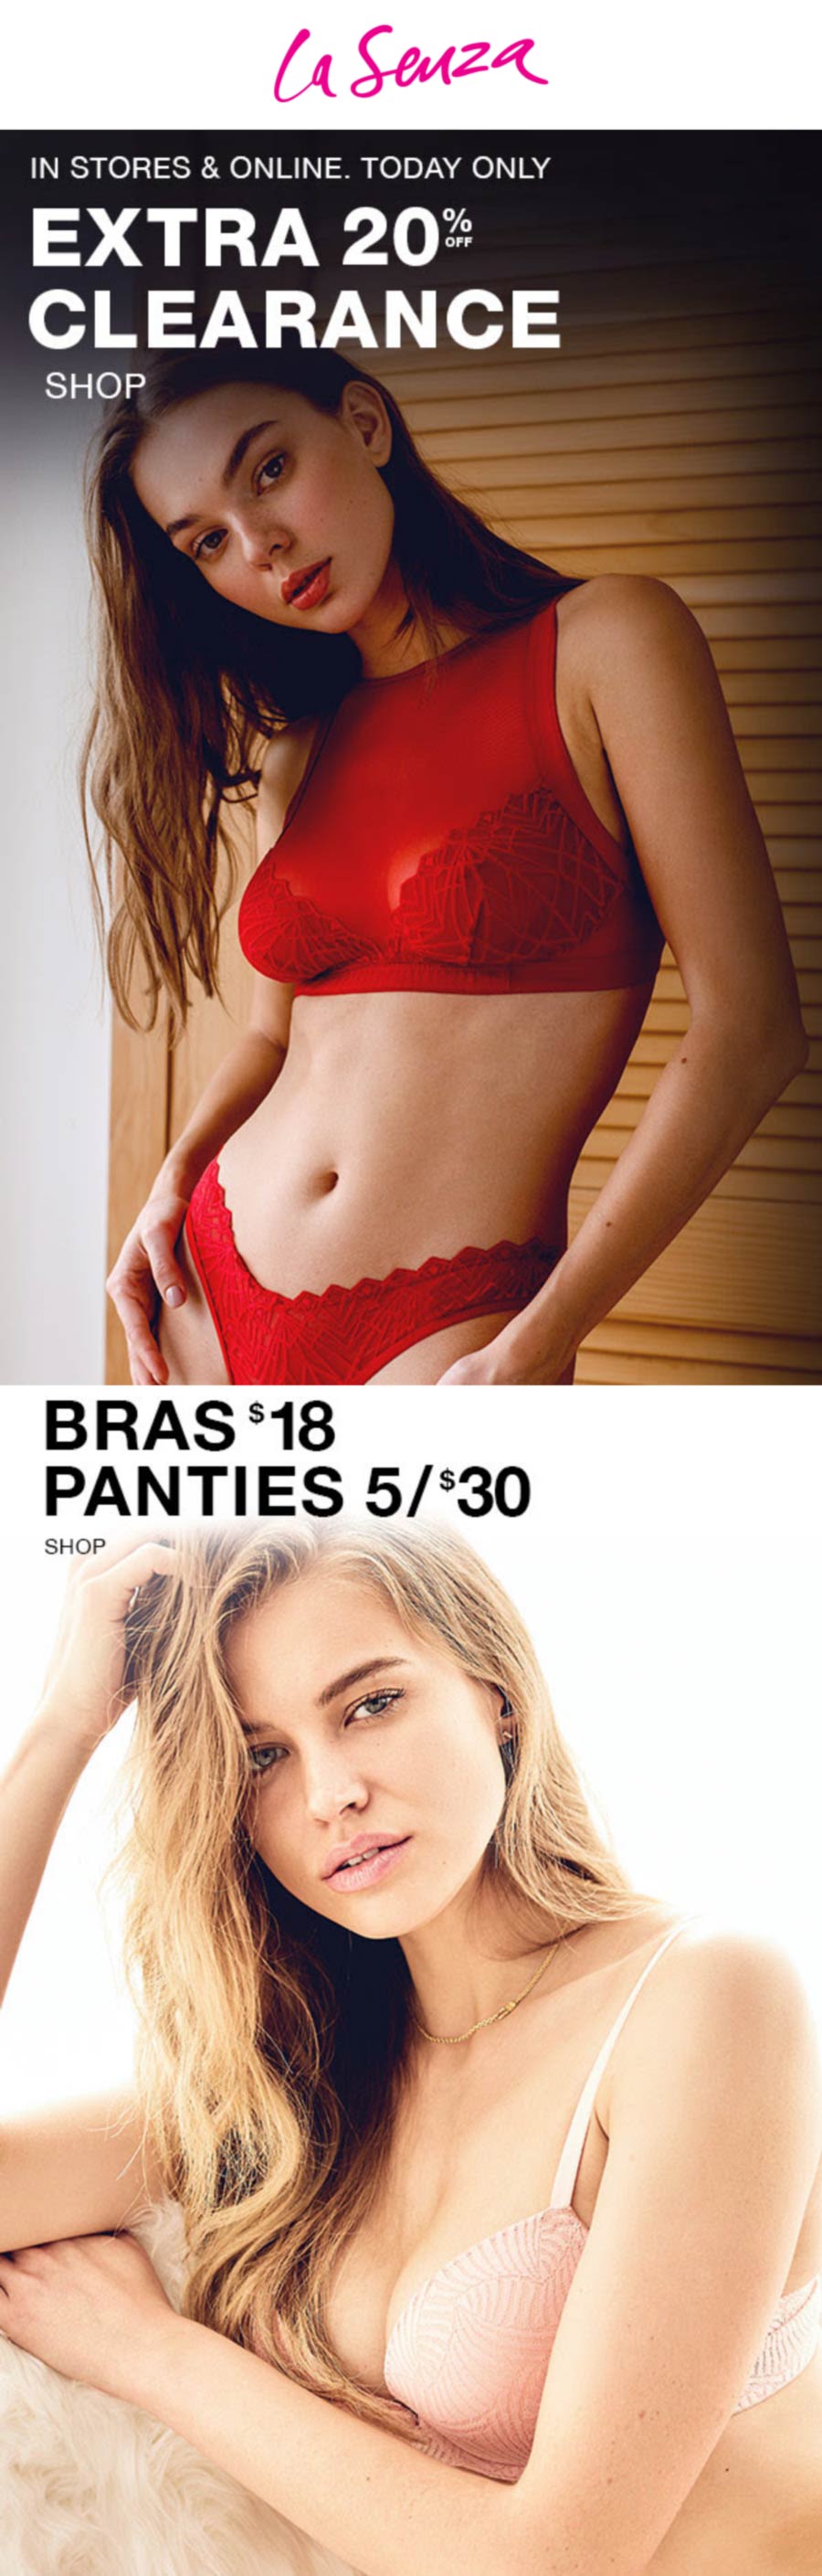 La Senza stores Coupon  Extra 20% off clearance today at La Senza, ditto online #lasenza 